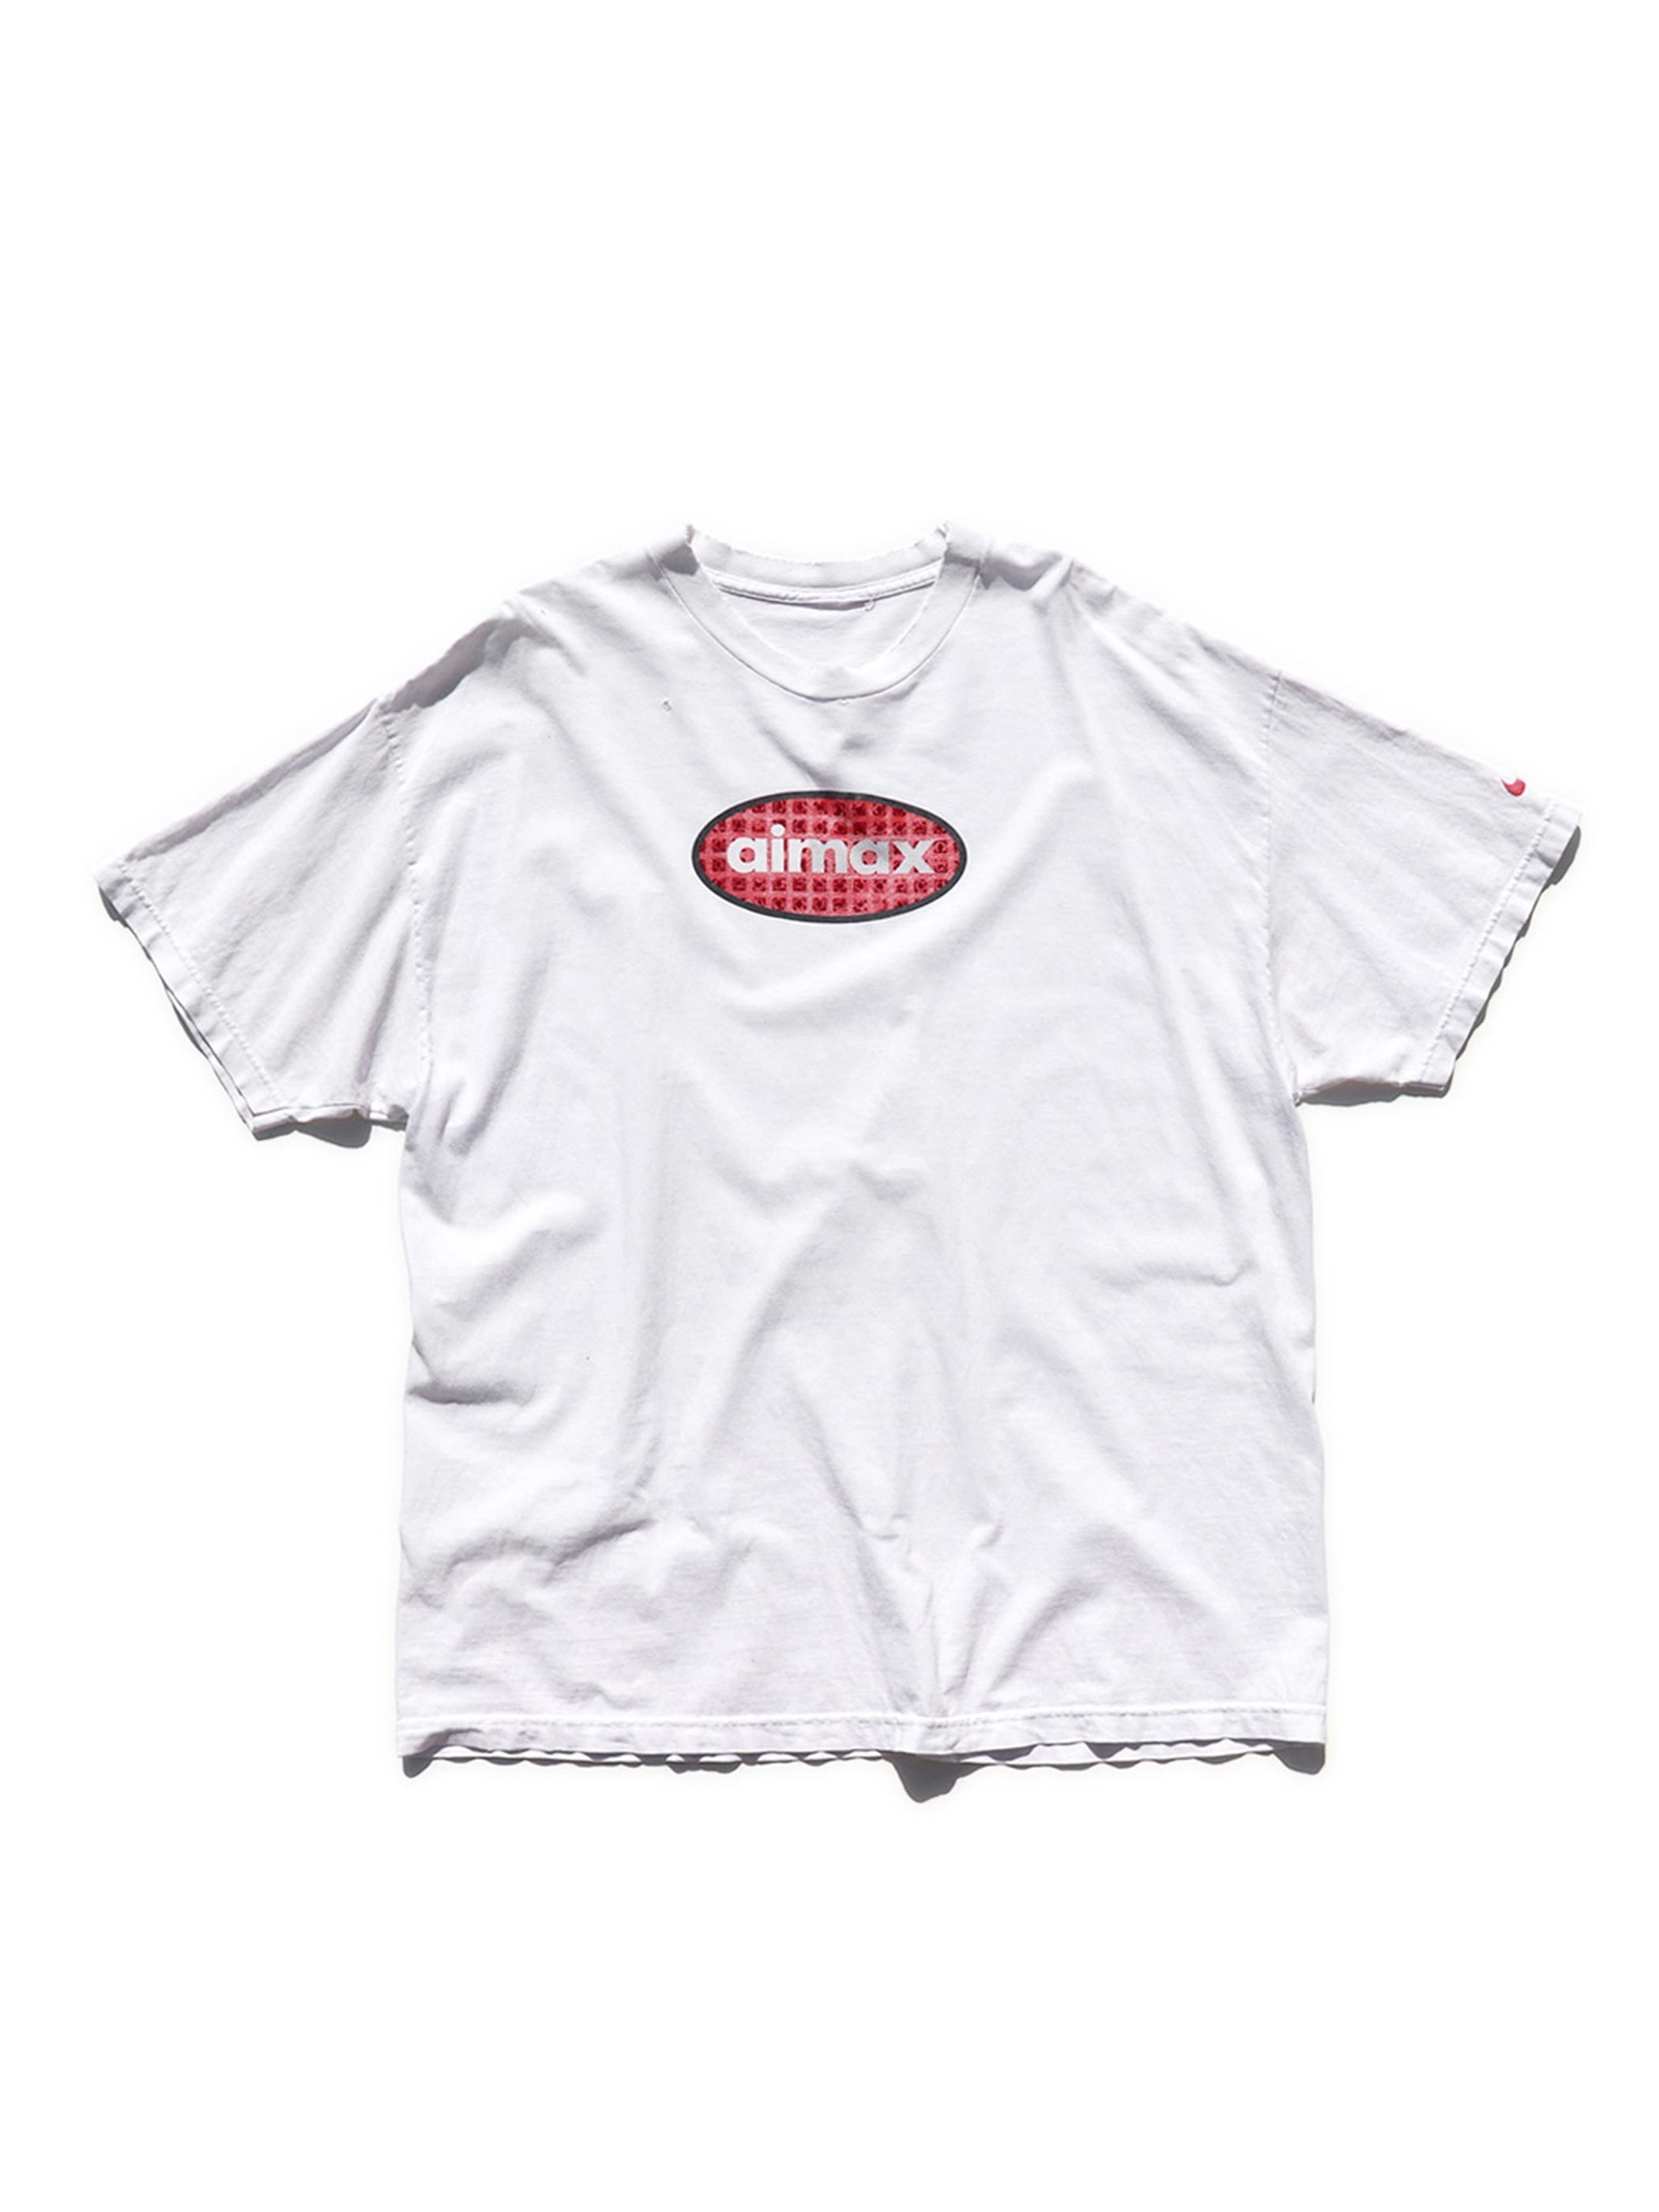 90 S Nike Air Max Logo プリントtシャツ About Xxl Post Junk Houyhnhnm S